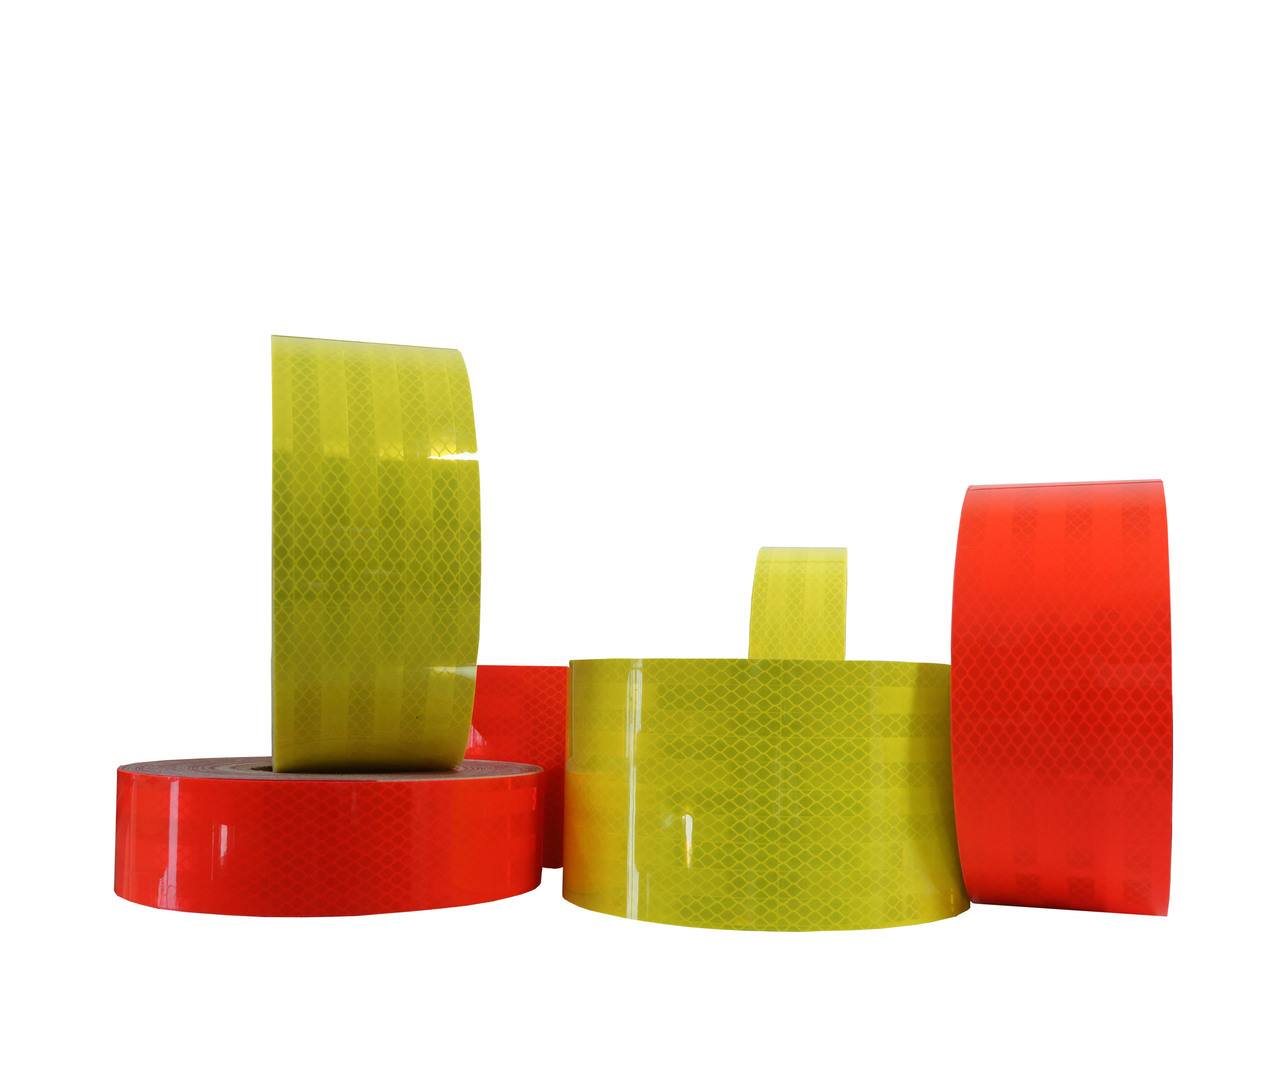 Details about   Fluo Yellow/Green 50mm High Grade Reflective Conspicuity Safety Adhesive Tape 